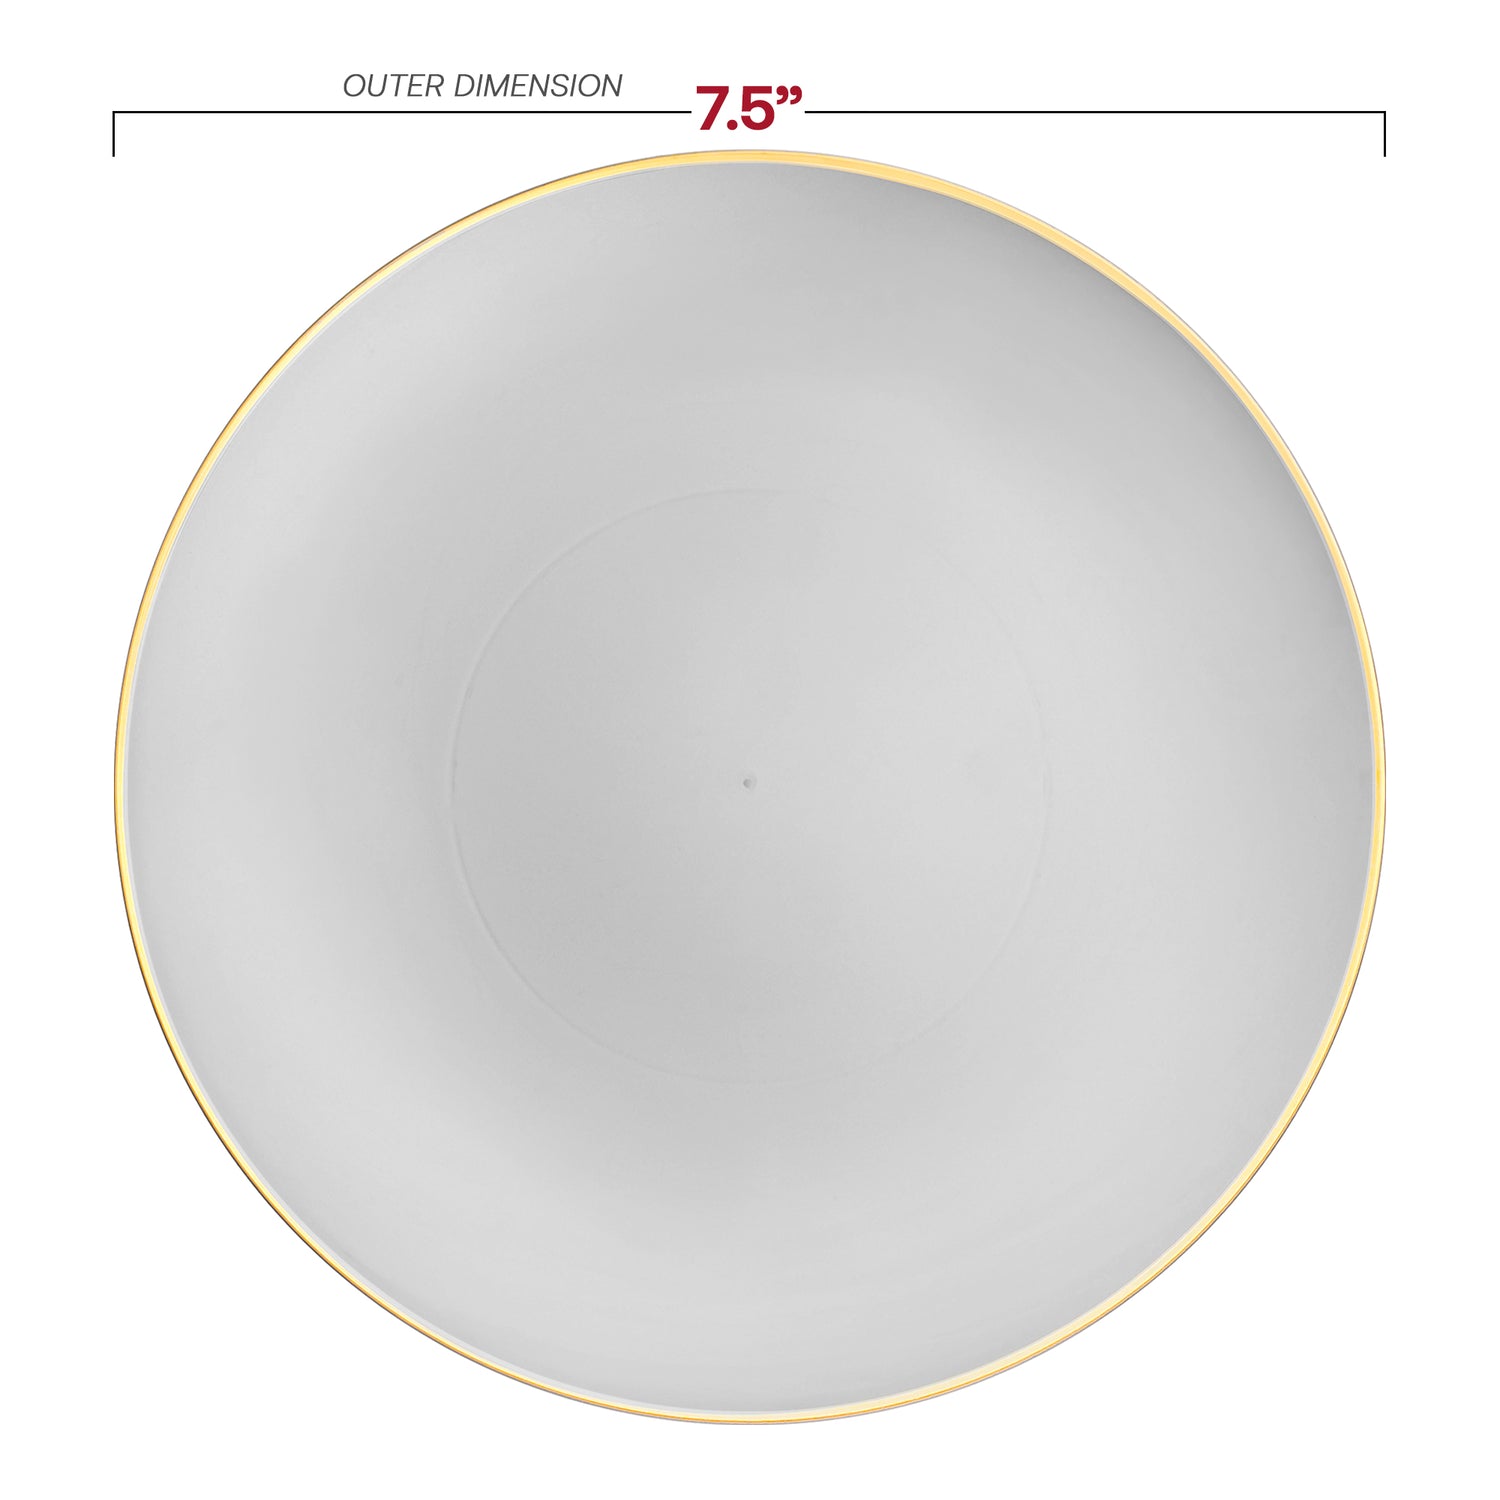 Gray with Gold Rim Organic Round Disposable Plastic Appetizer/Salad Plates (7.5") Dimension | The Kaya Collection